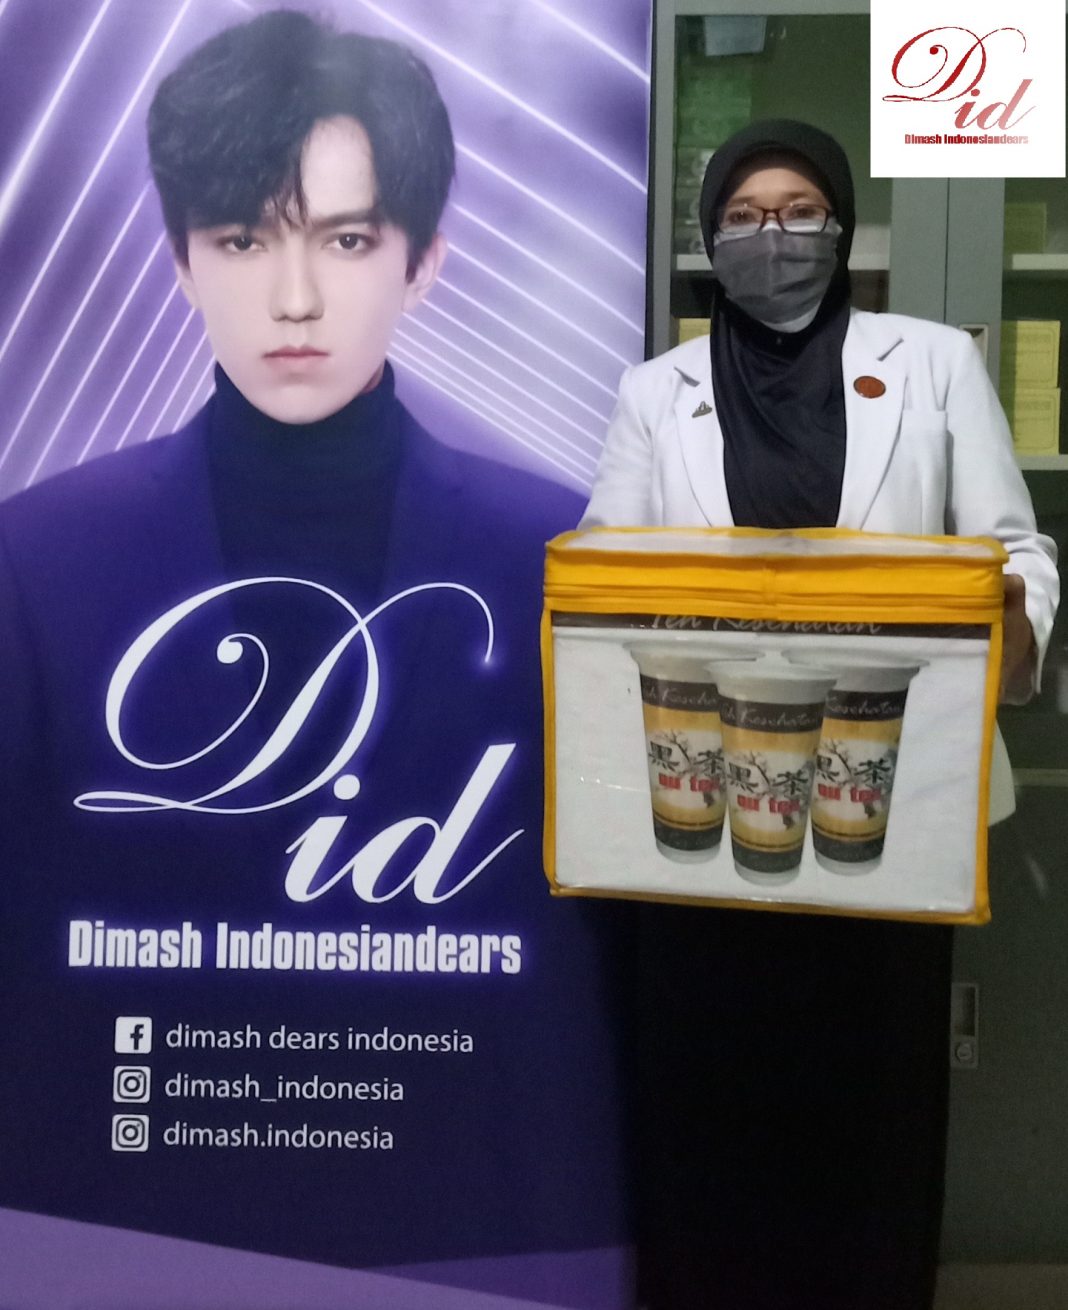 Dimash Indonesian fanclub held the charity event to fight against COVID-19